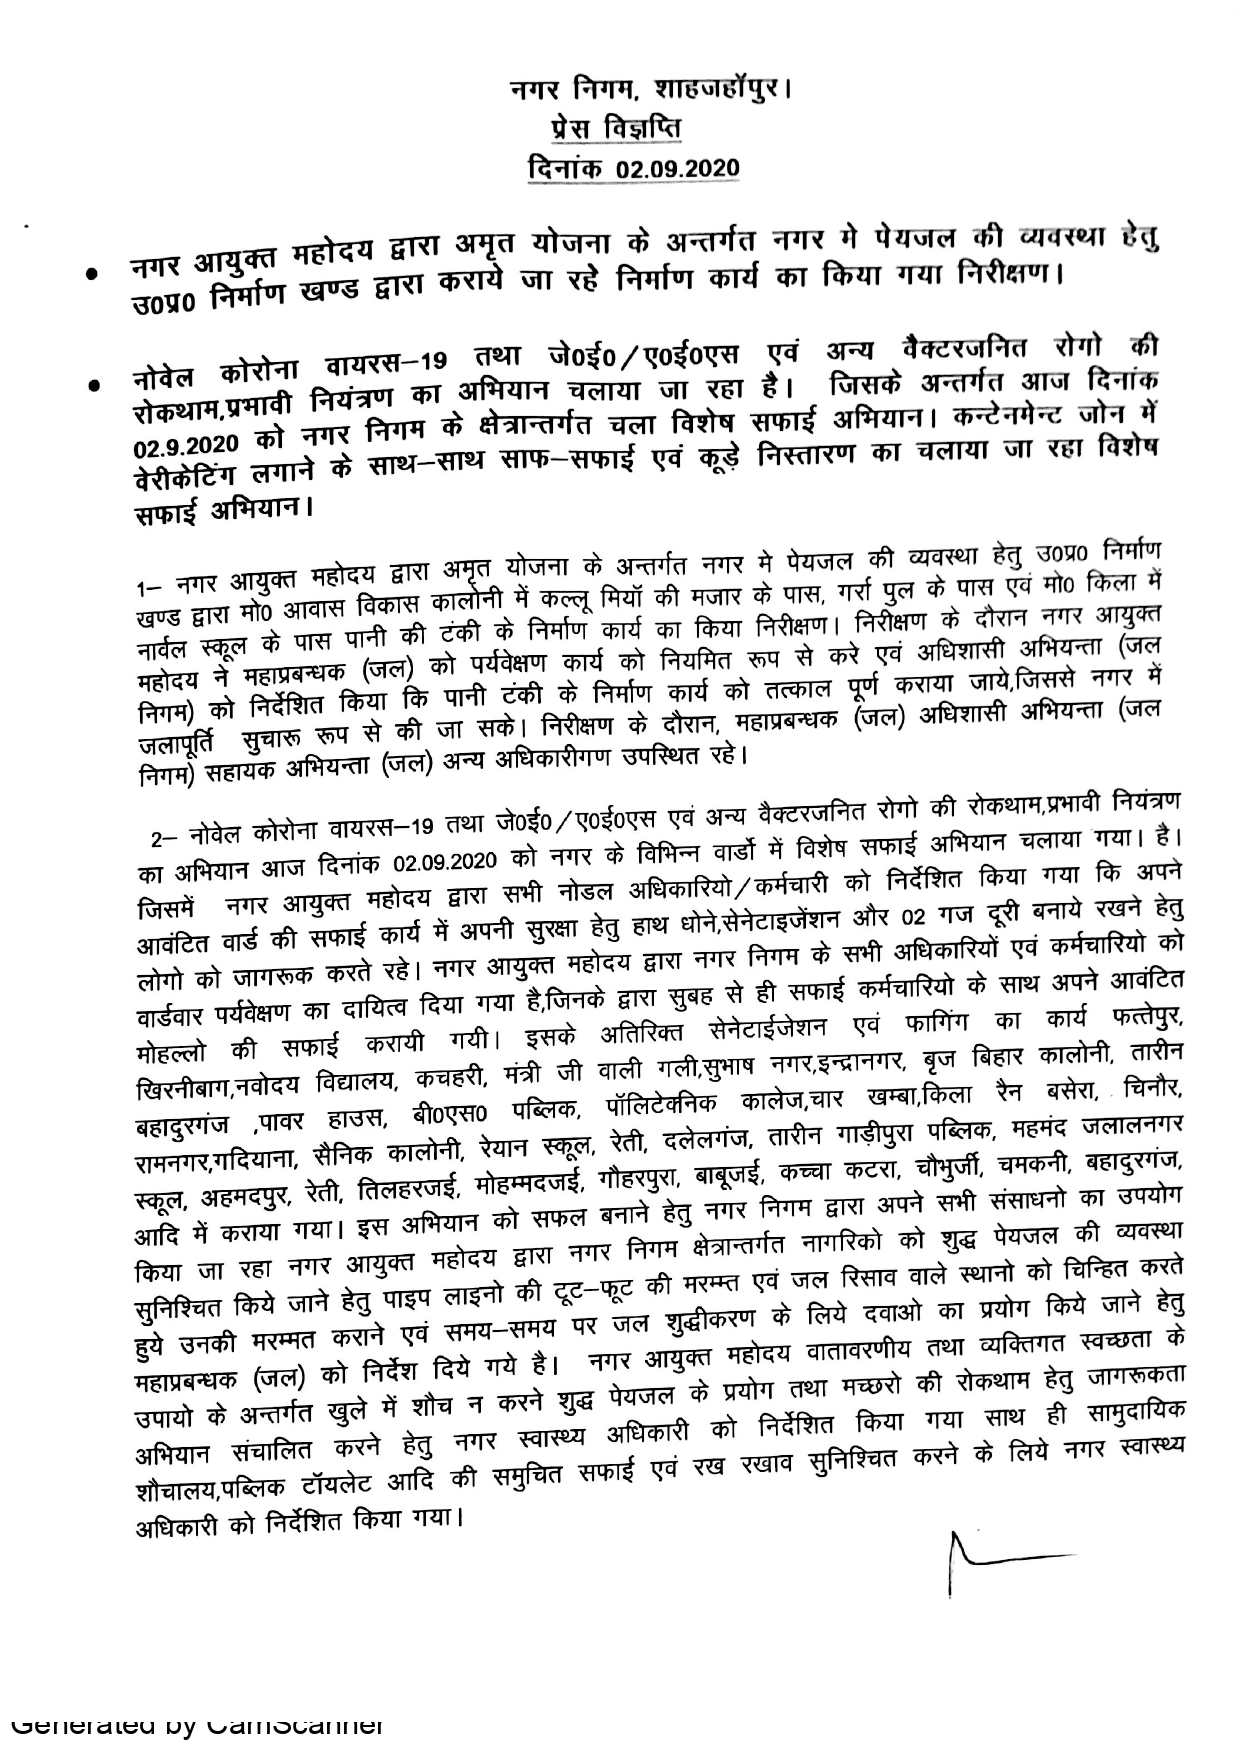 Regarding special cleanliness campaign led by Municipal Corporation in its area on 02.09.2020